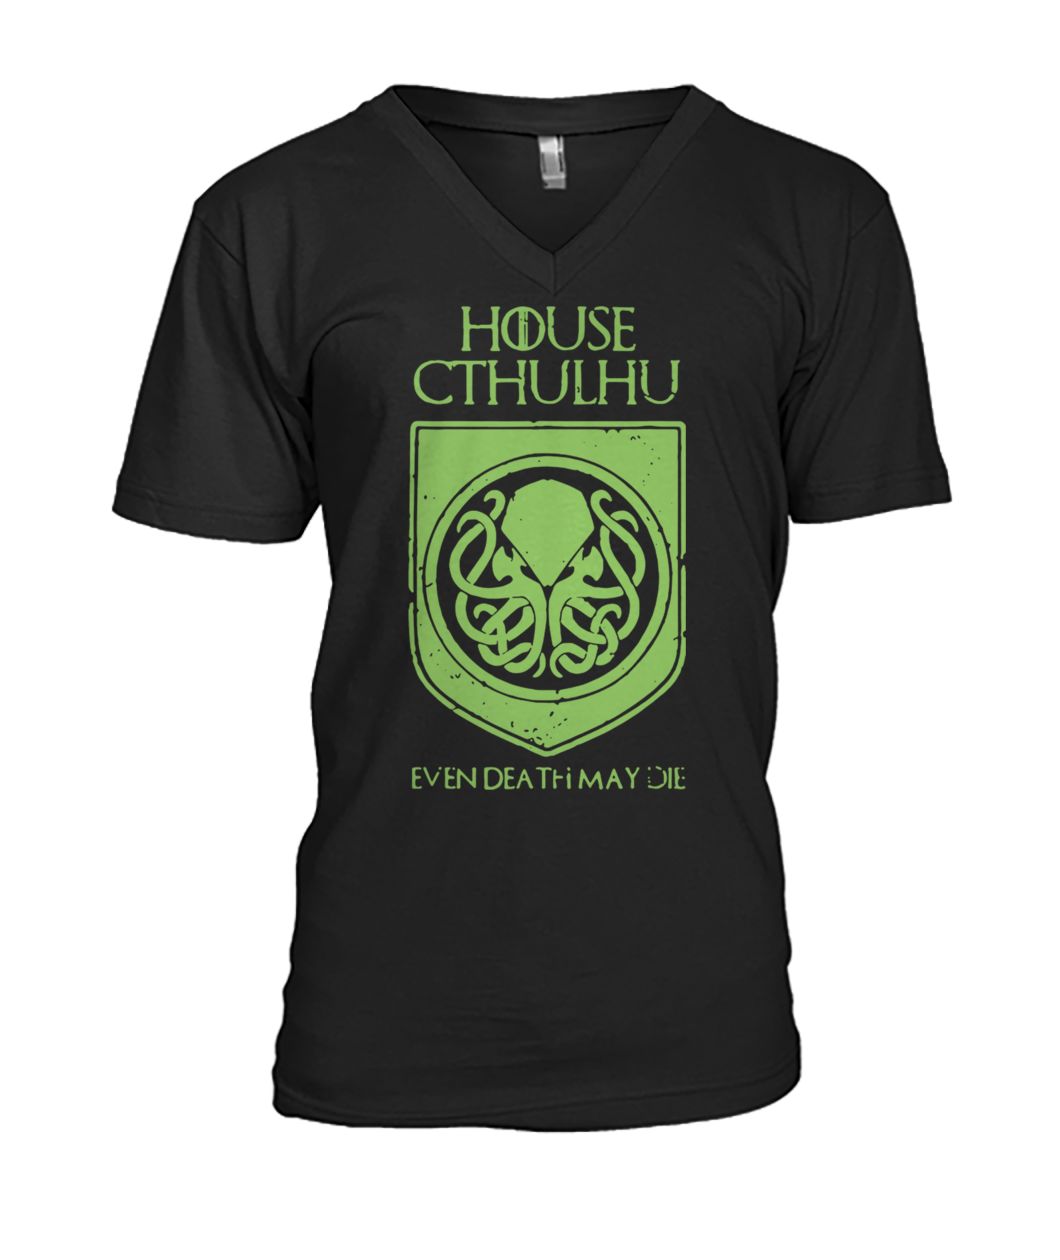 Game of thrones house cthulhu even death may die mens v-neck